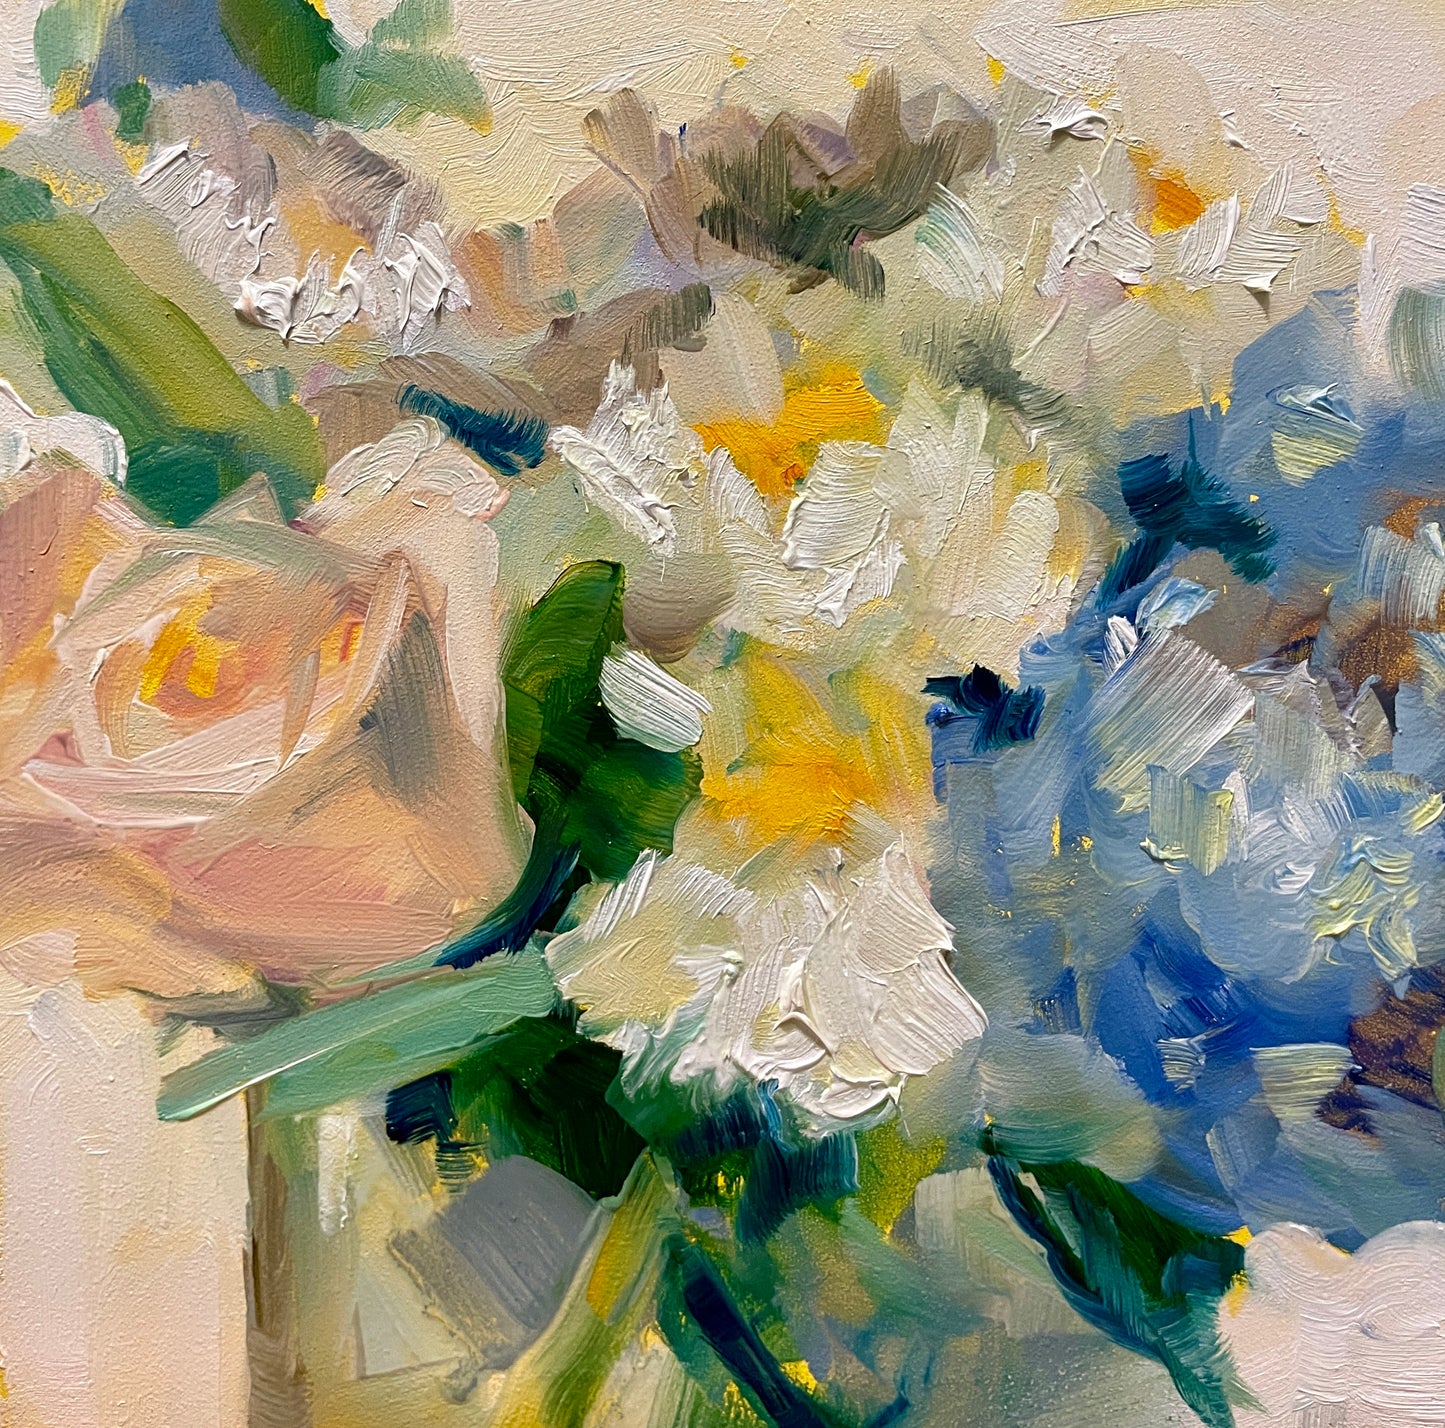 White Flowers and Blue Hydrangea, 5X5 Square, Original Oil Painting